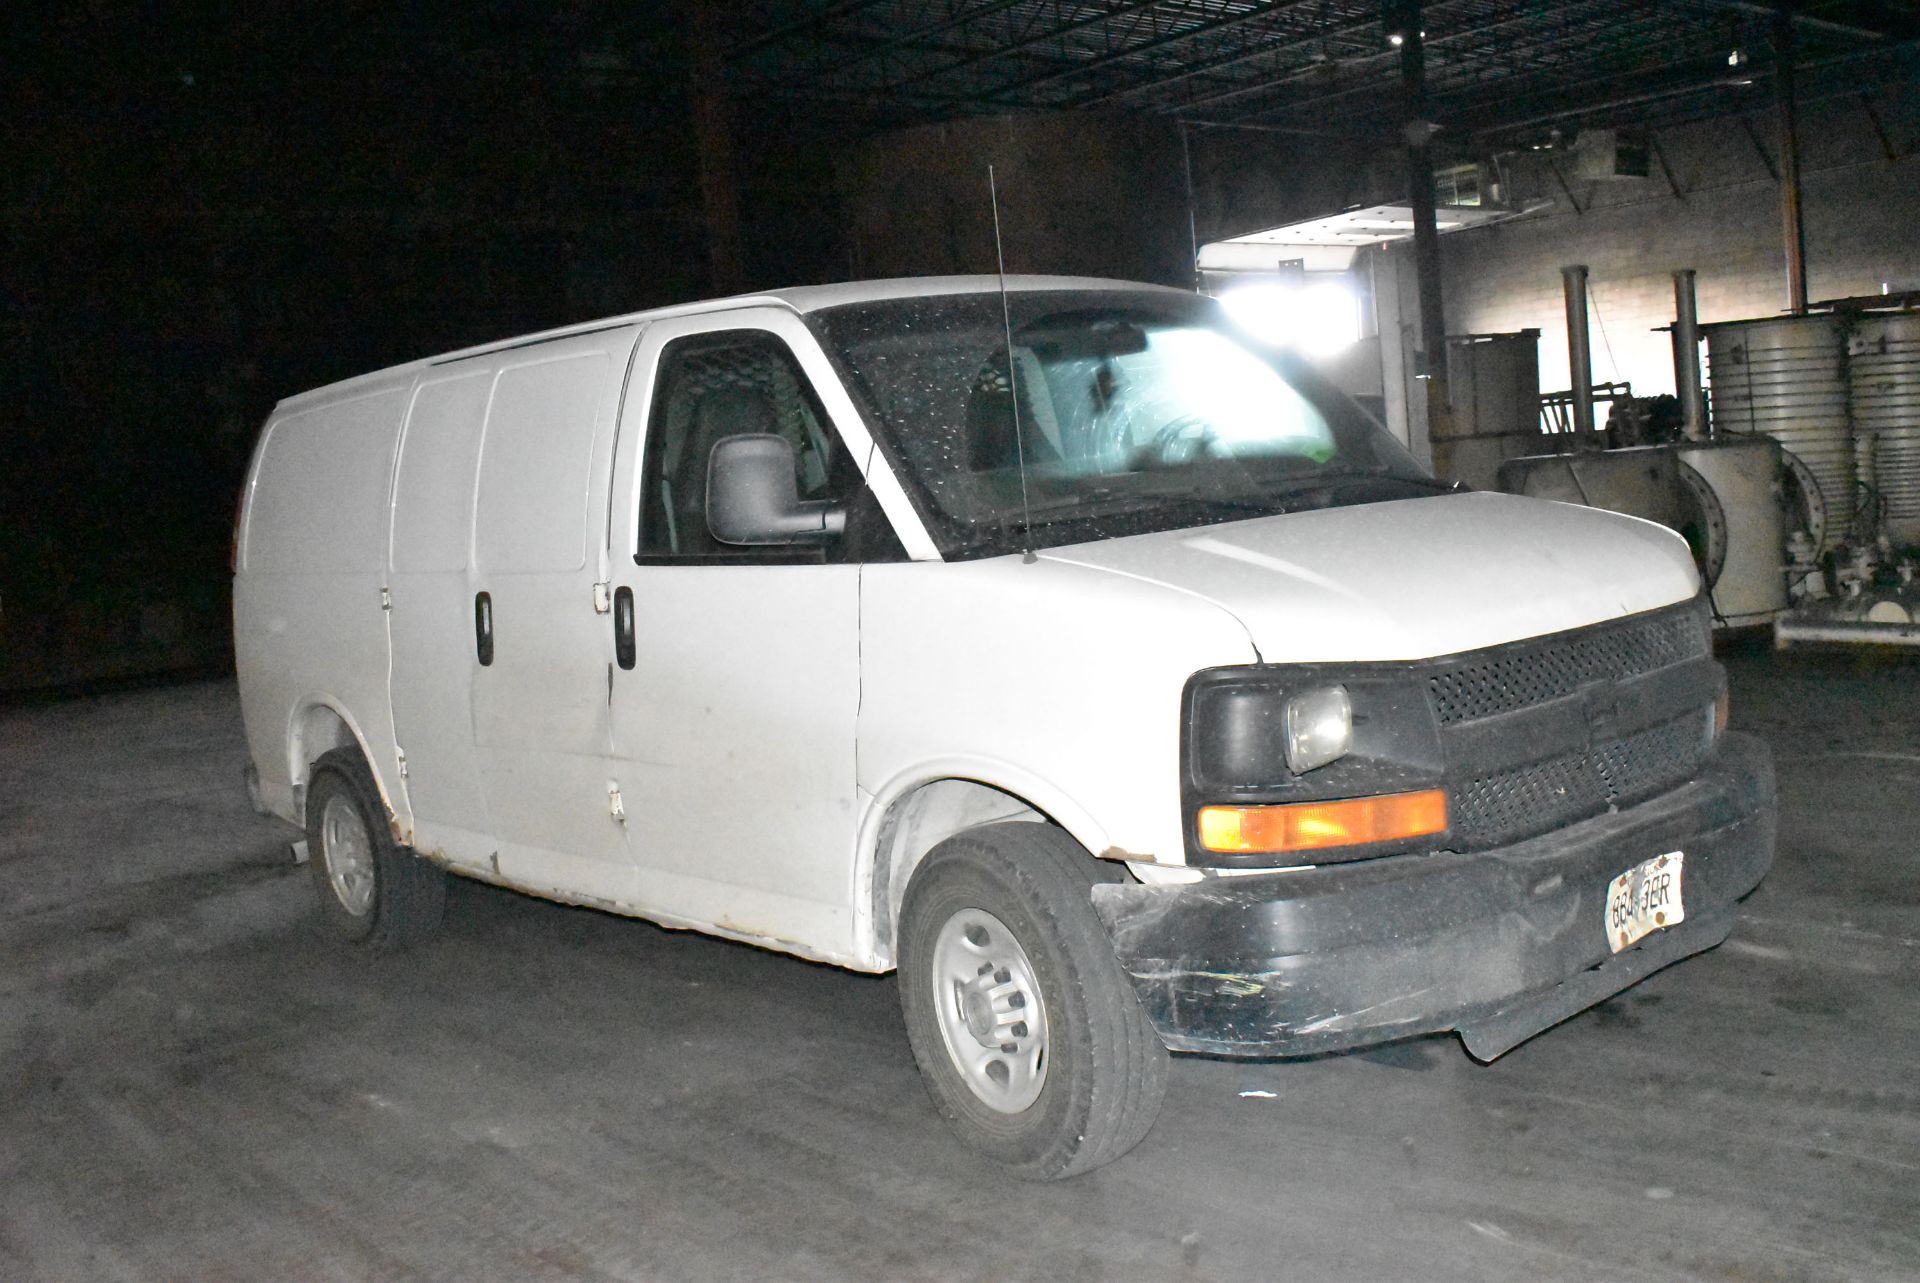 CHEVROLET (2008) EXPRESS 2500 CARGO VAN WITH 4.8 LITER V8 GAS ENGINE, AUTO, RWD, APPROX 556,000 KM - Image 5 of 12